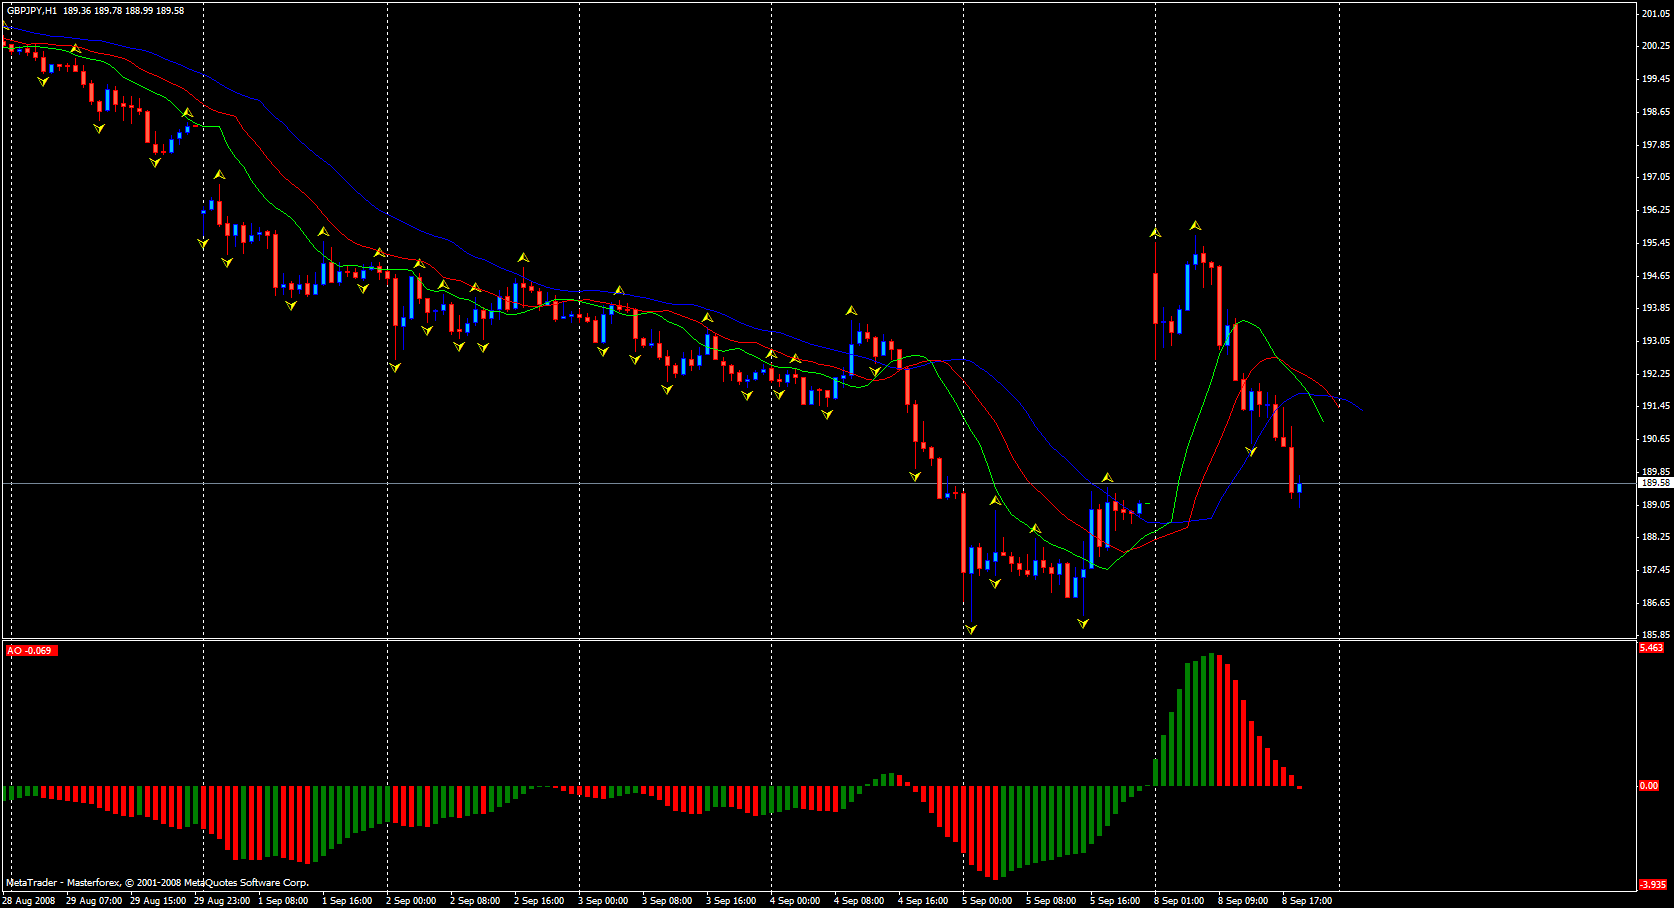 Chaos Strategy - Mid term and long term trading. - Forex Trading Strategies  - Trading Systems - MQL5 programming forum